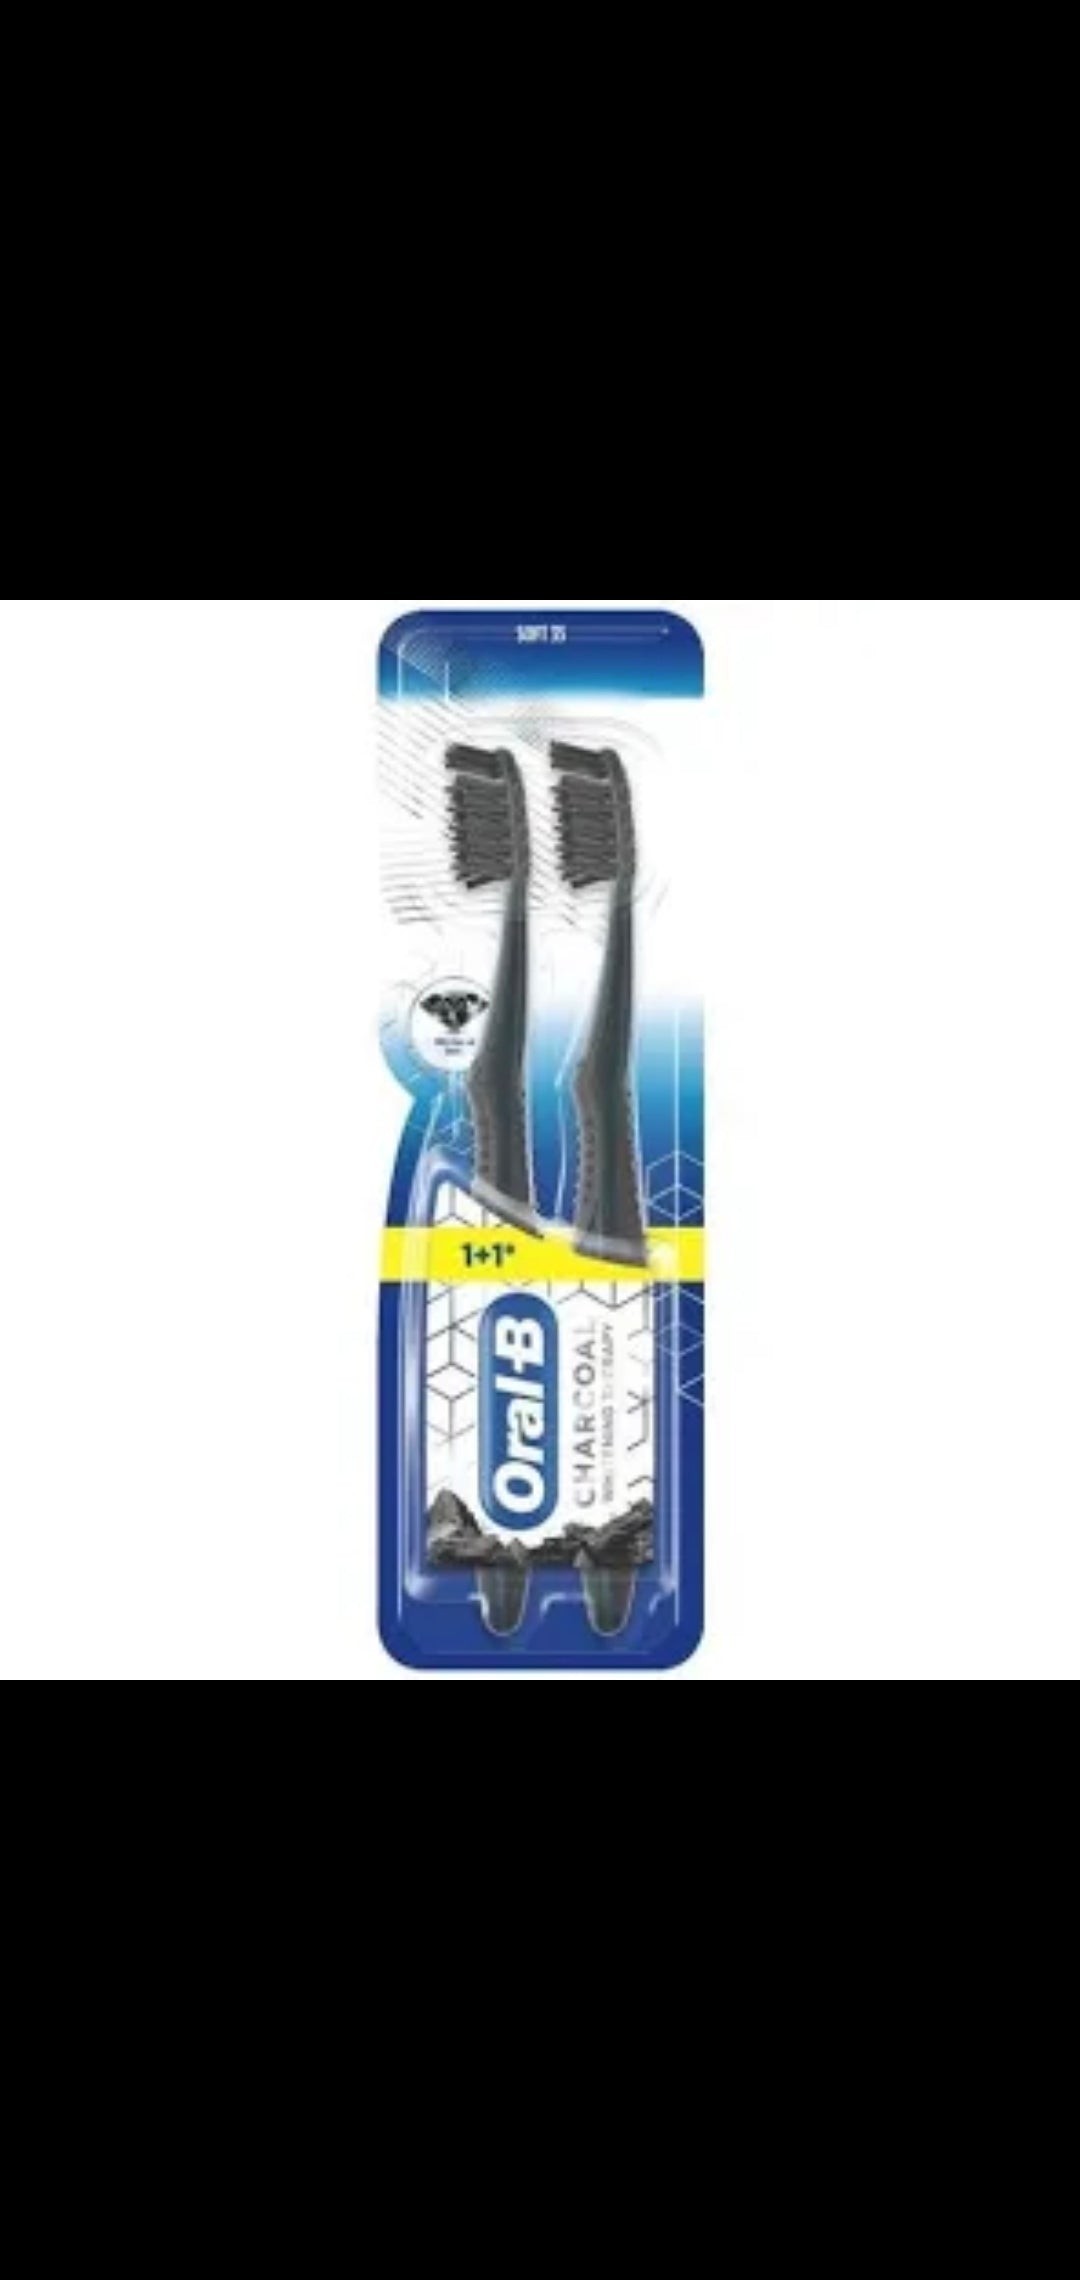 Oral b double brush